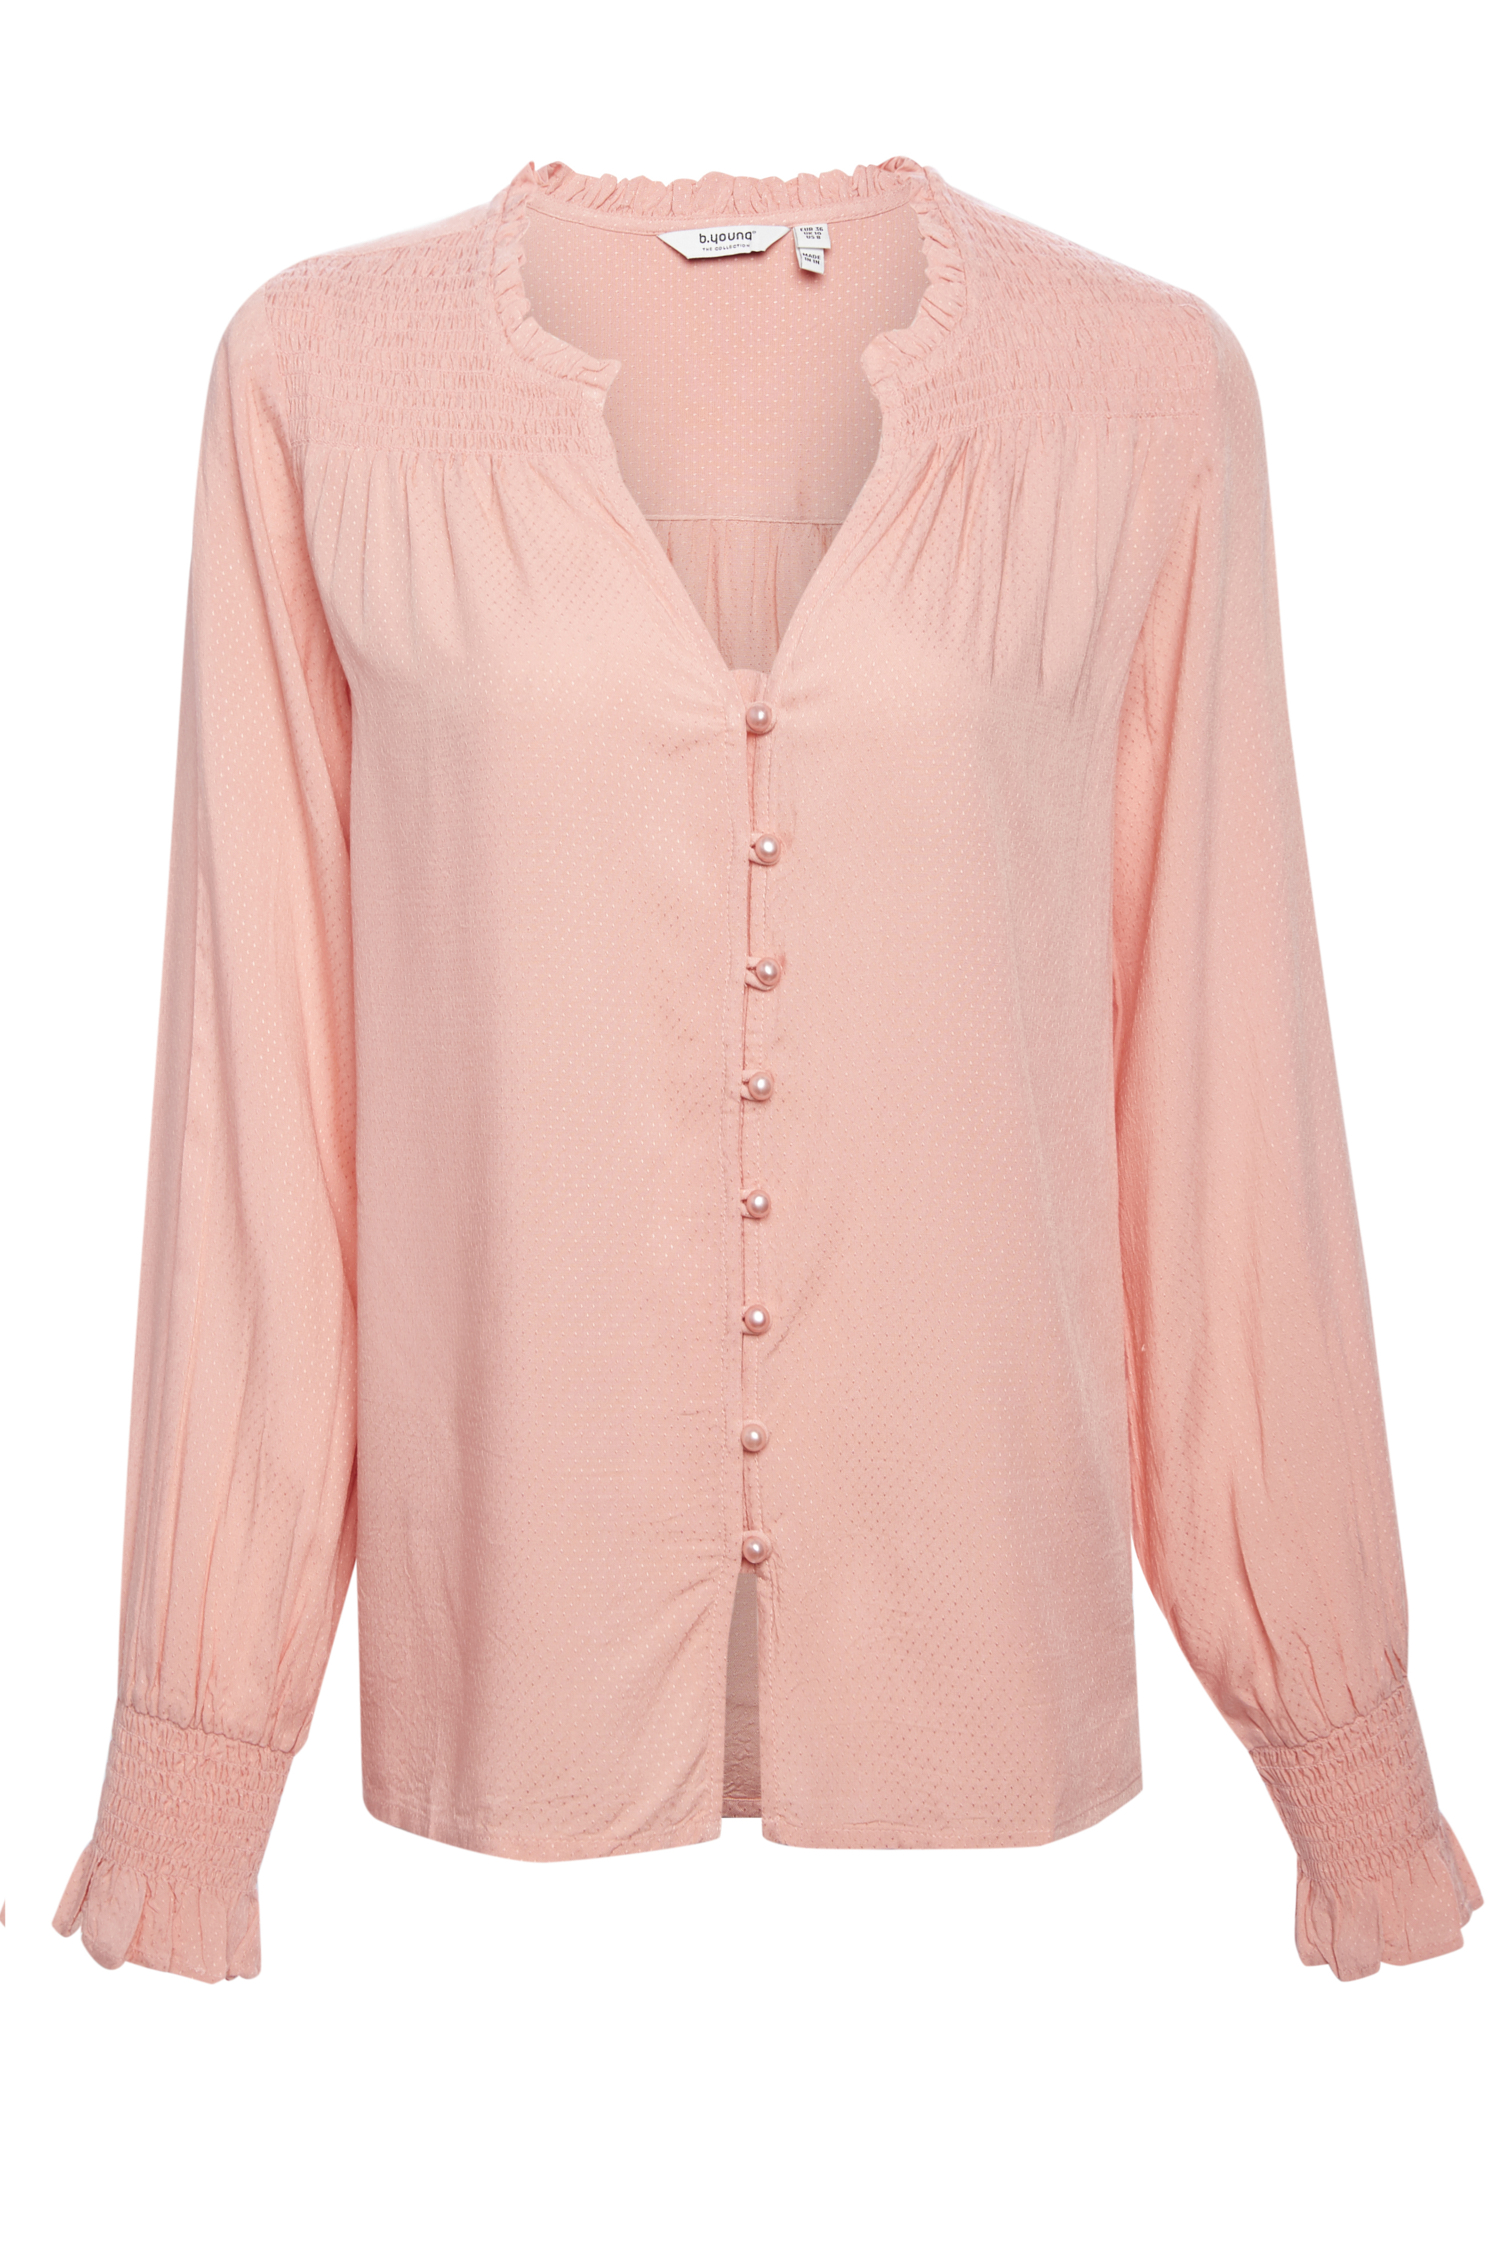 B. Young Smocked Button Down Blouse